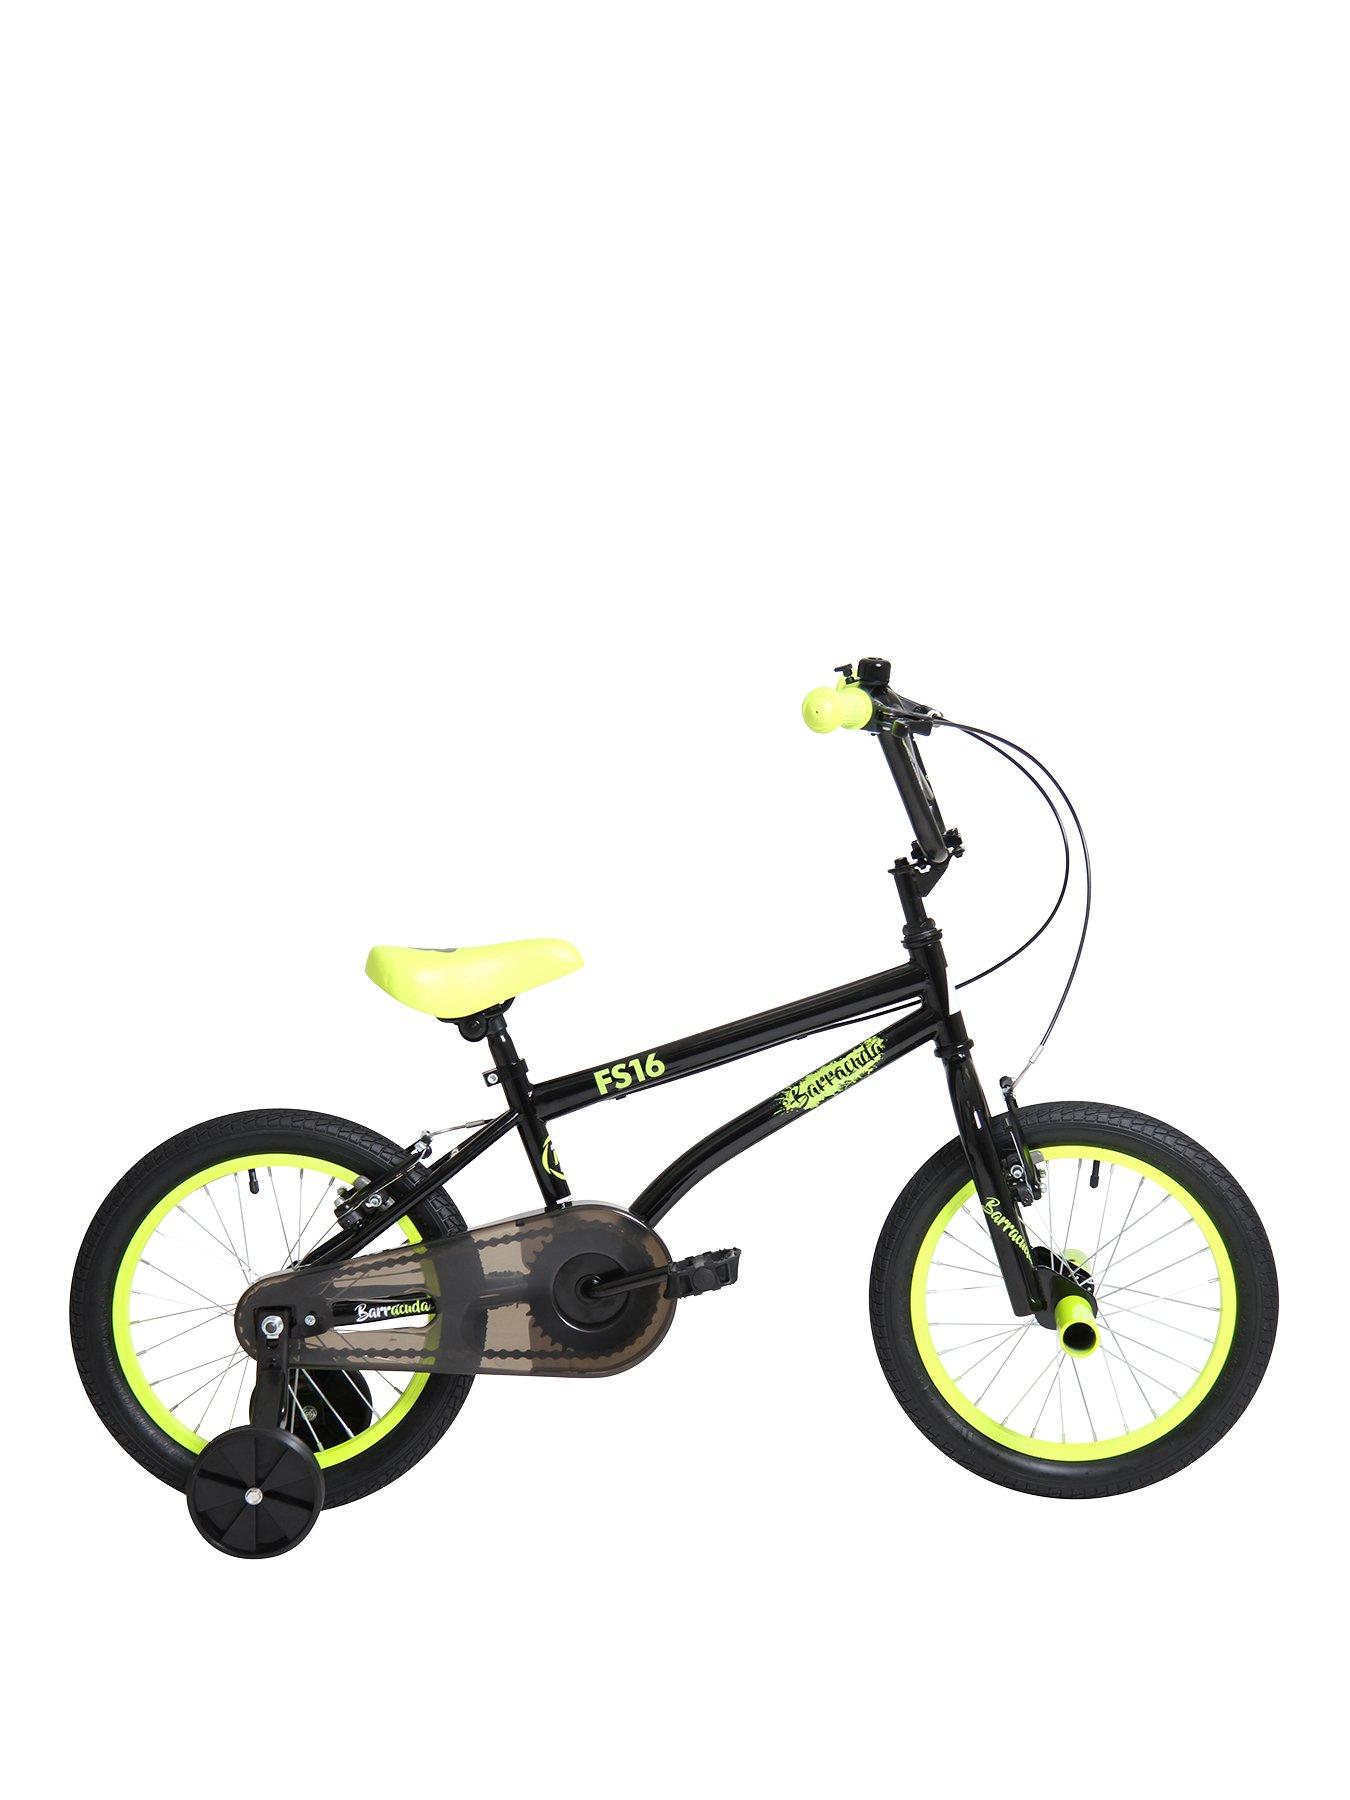 16-Inch X-Games FS-16 BMX//Freestyle Bicycle Black//Yellow